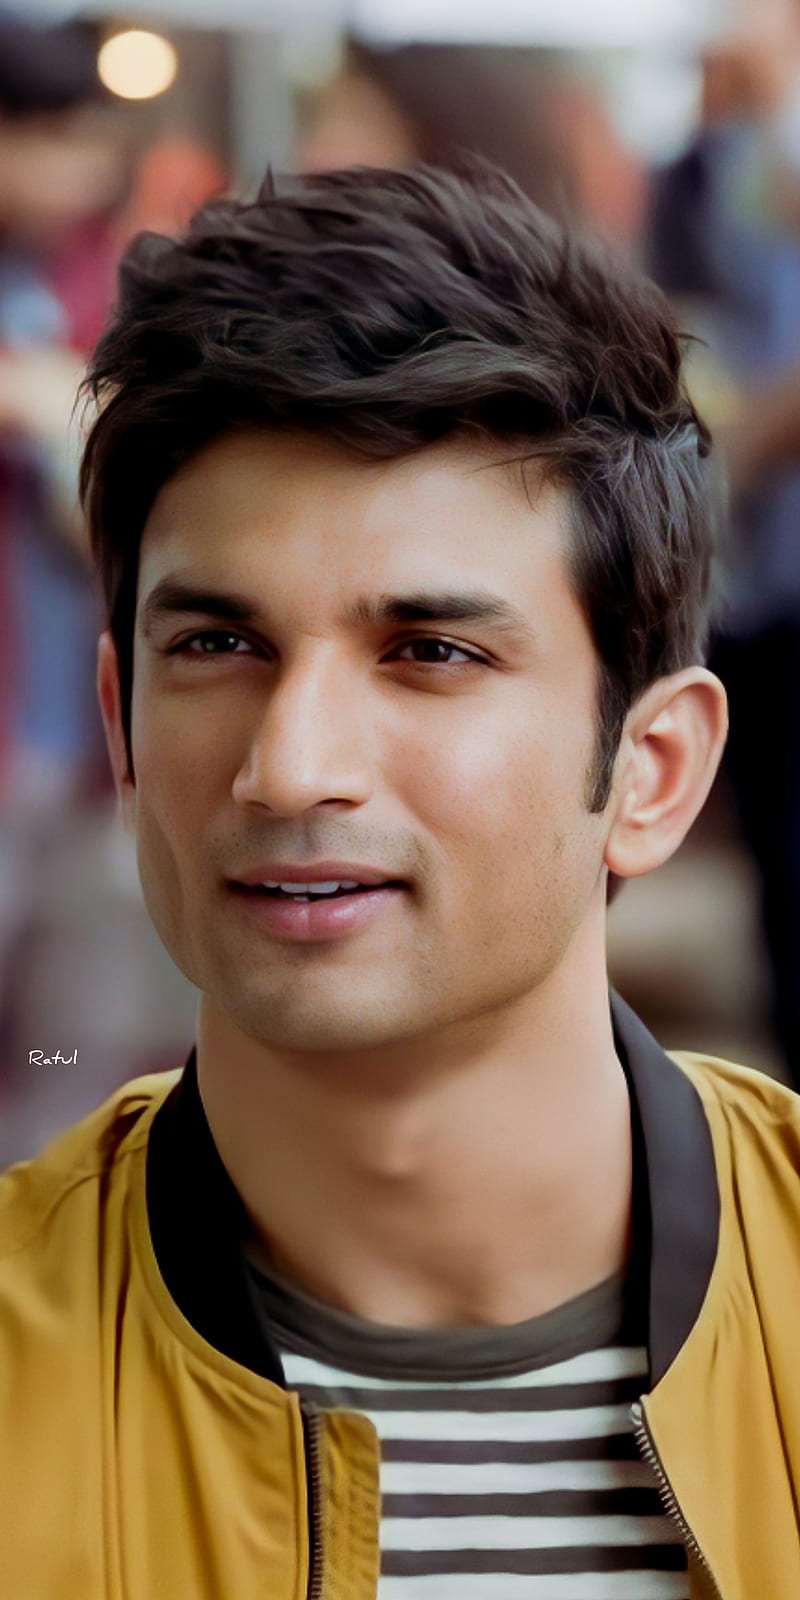 Sushant Singh Rajput: Incredible Collection of 999+ HD Images in Full 4K